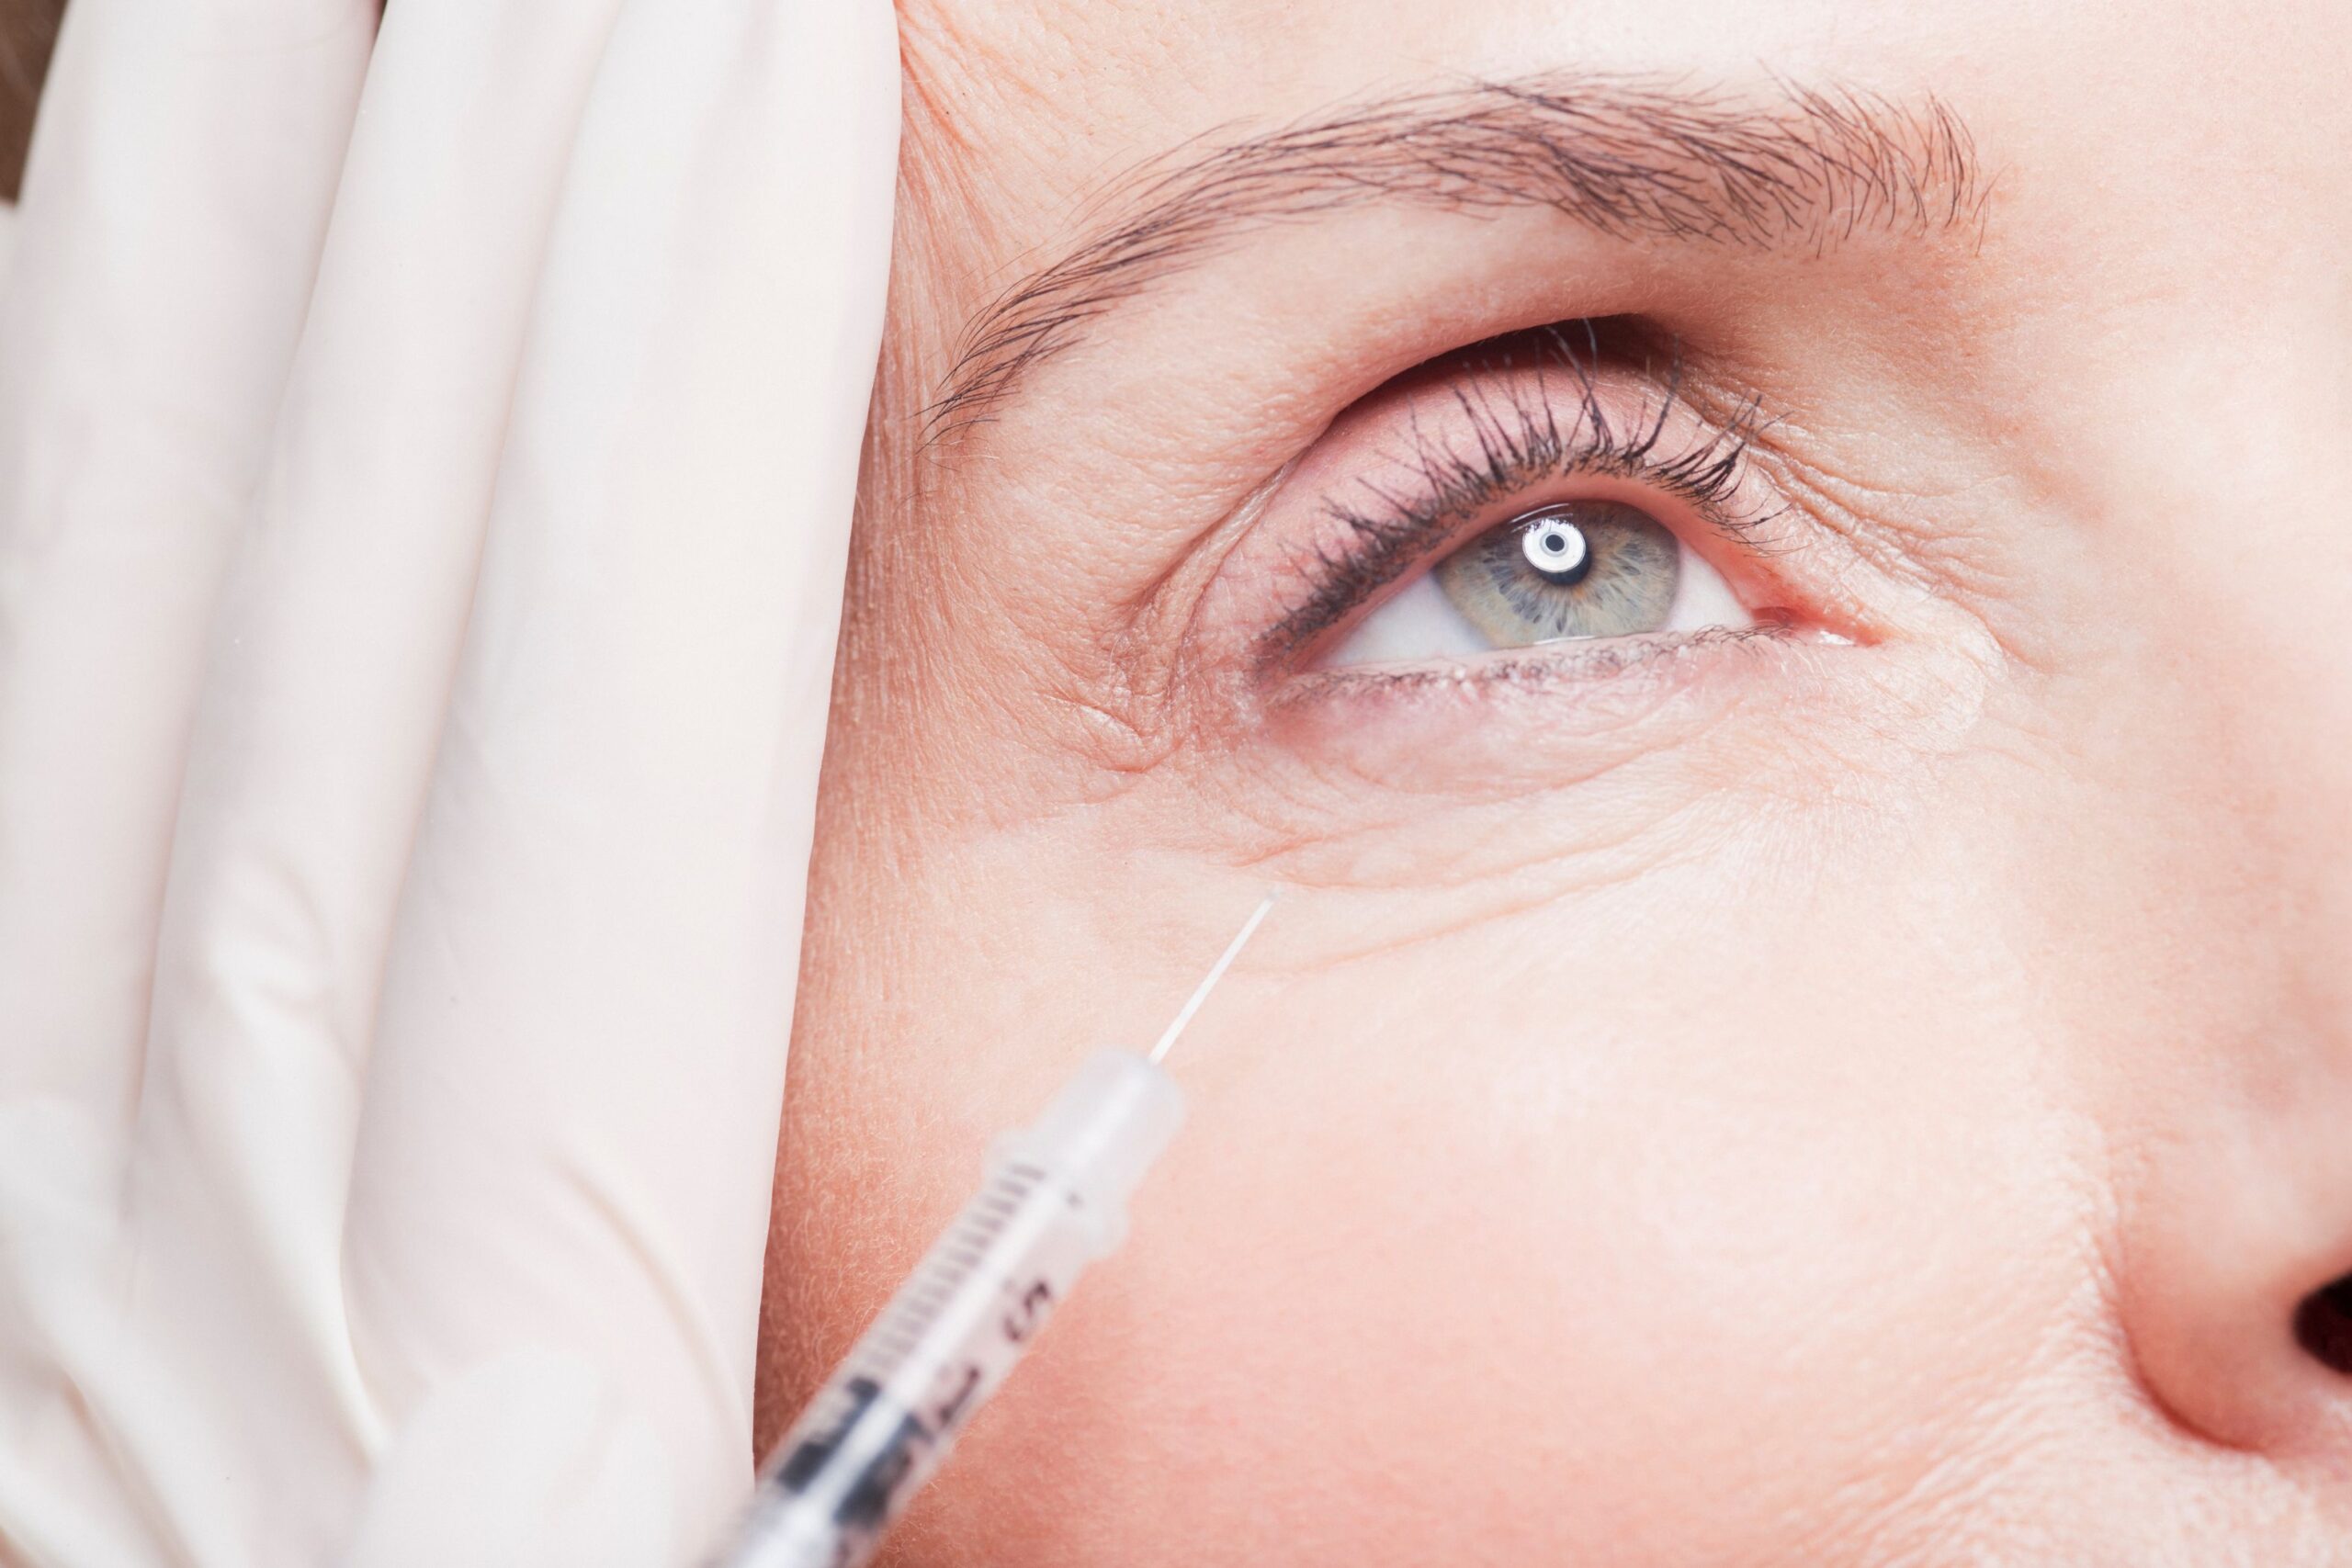 Dermal fillers for dark circles at Freyja Medical in Wrexham, Nantwich and Cheshire